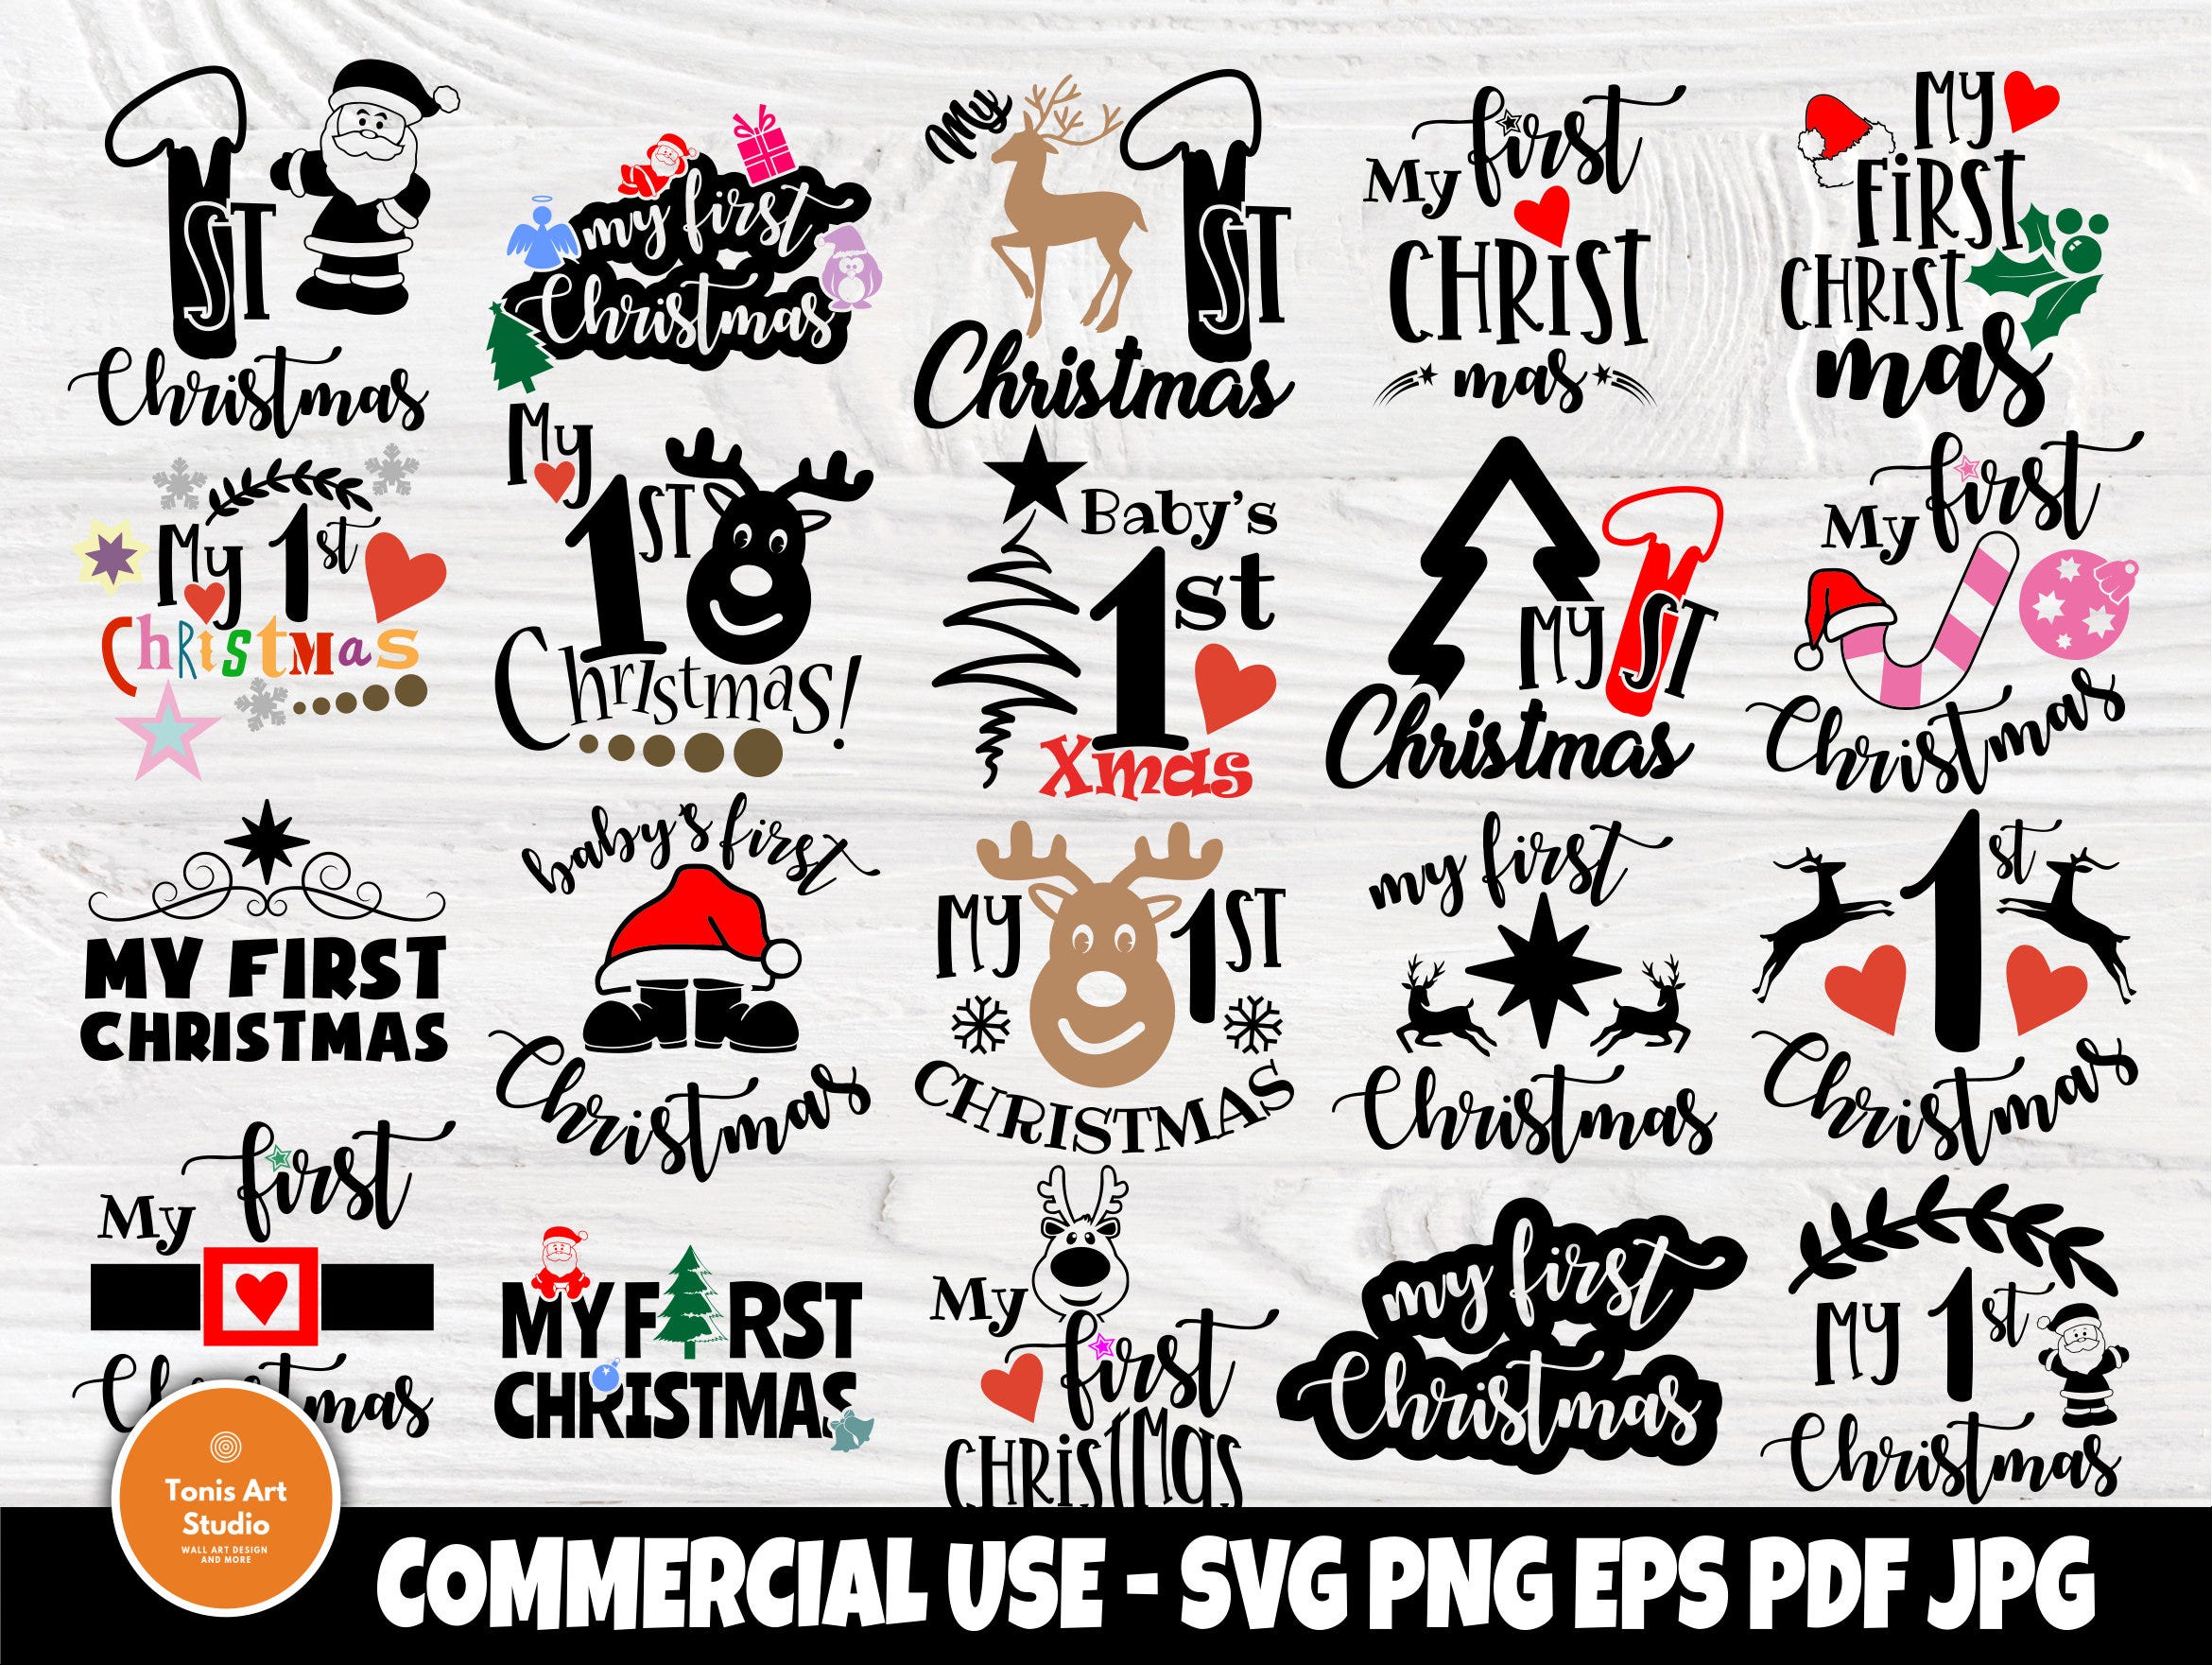 My first christmas SVG | Svg bundle | My 1st christmas | Christmas svg | Cricut and silhouette cut files | Cutting files | Svg designs